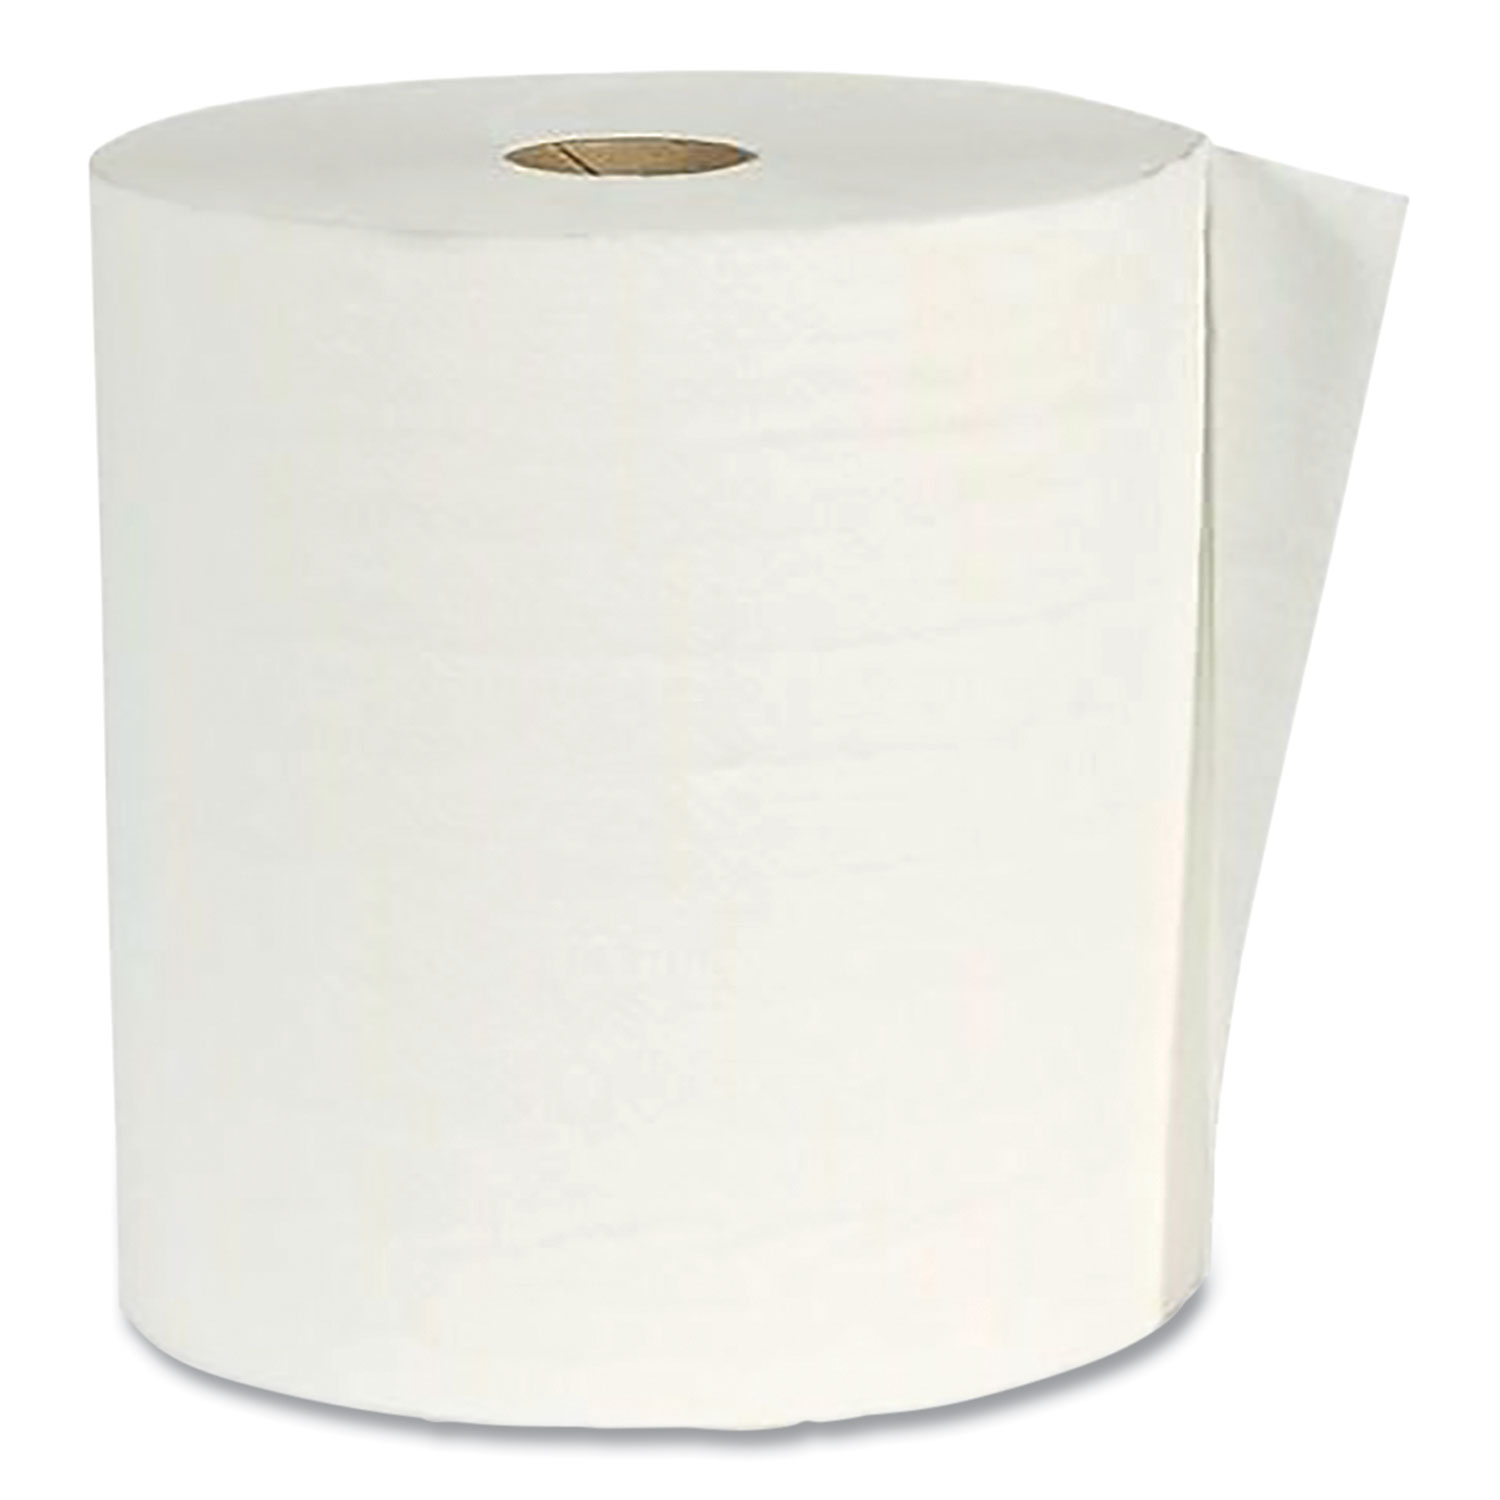 American Paper Converting Hardwound Paper Towel Roll, Virgin Paper, 1-Ply, 7.88 x 800 ft, White, 6/Carton